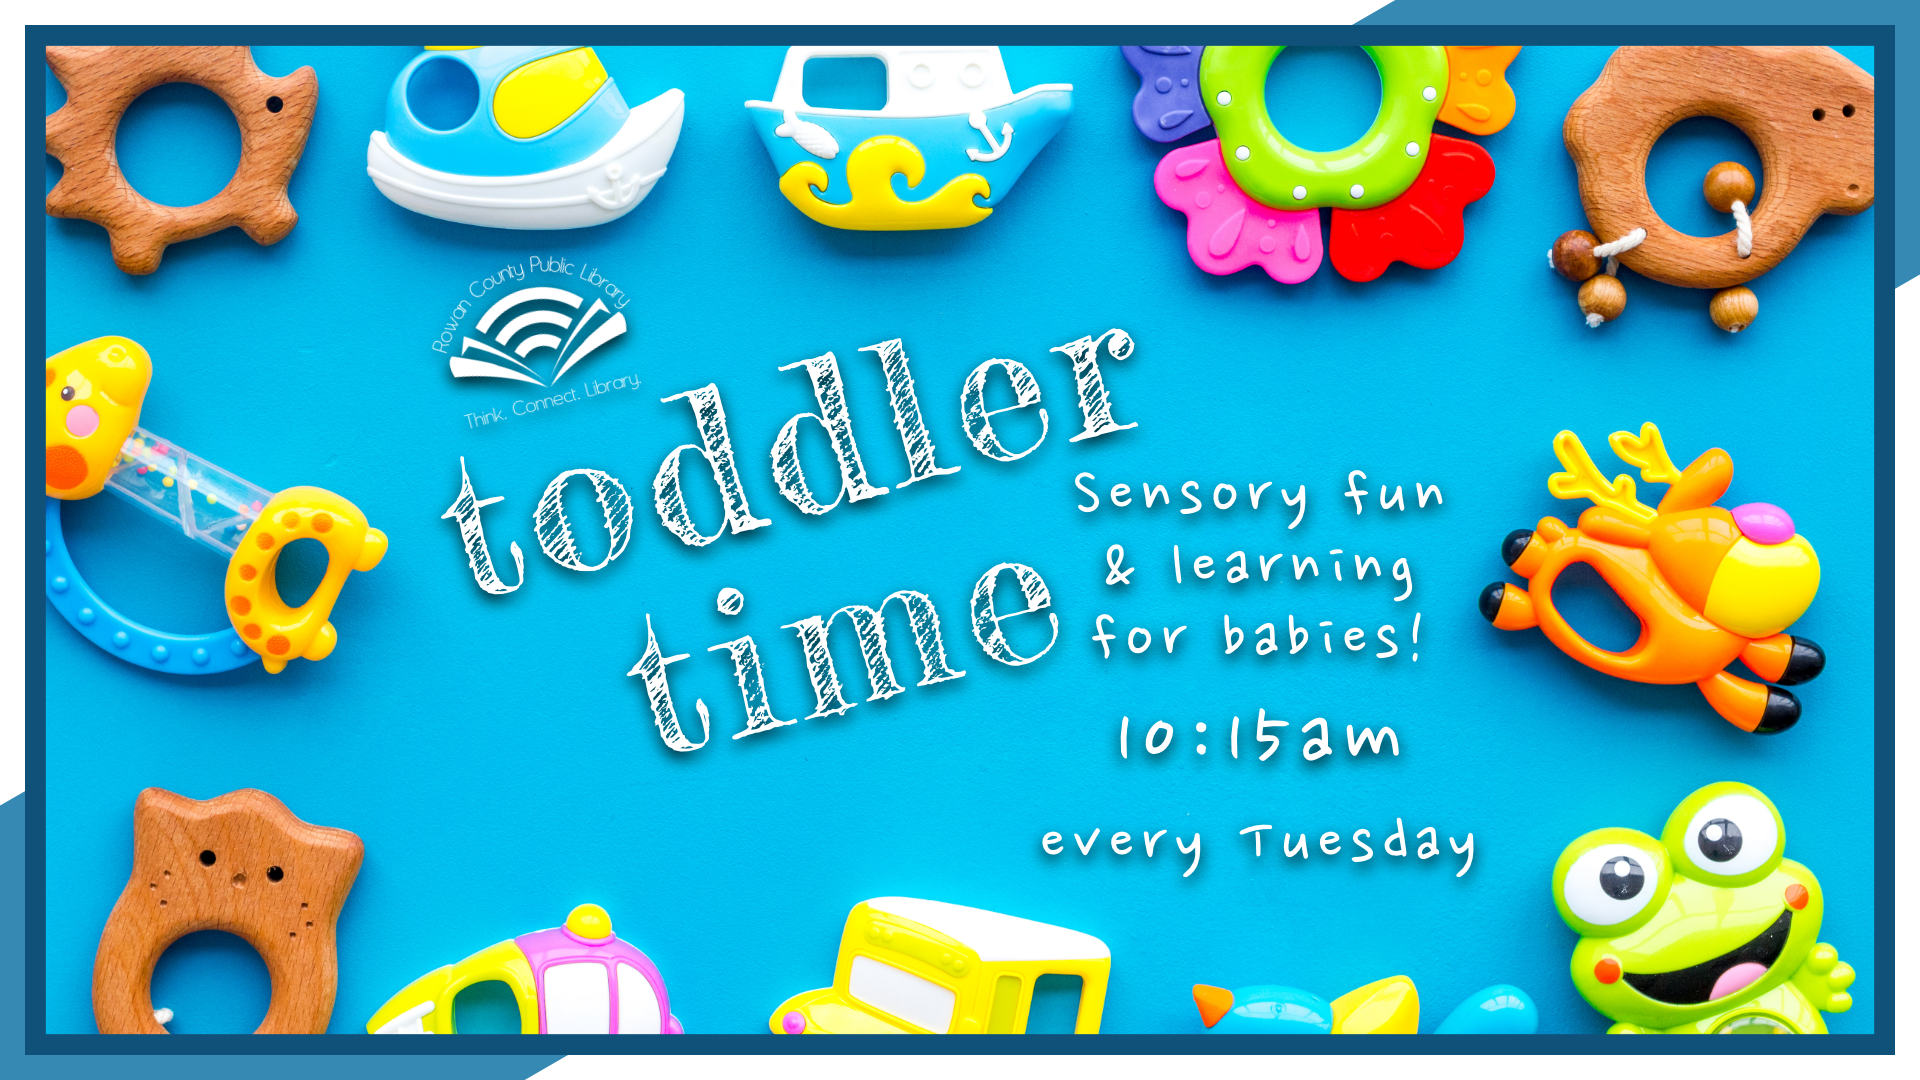 Toddler Time, Tuesdays weekly at 10:15am, intended for ages 35 months and under